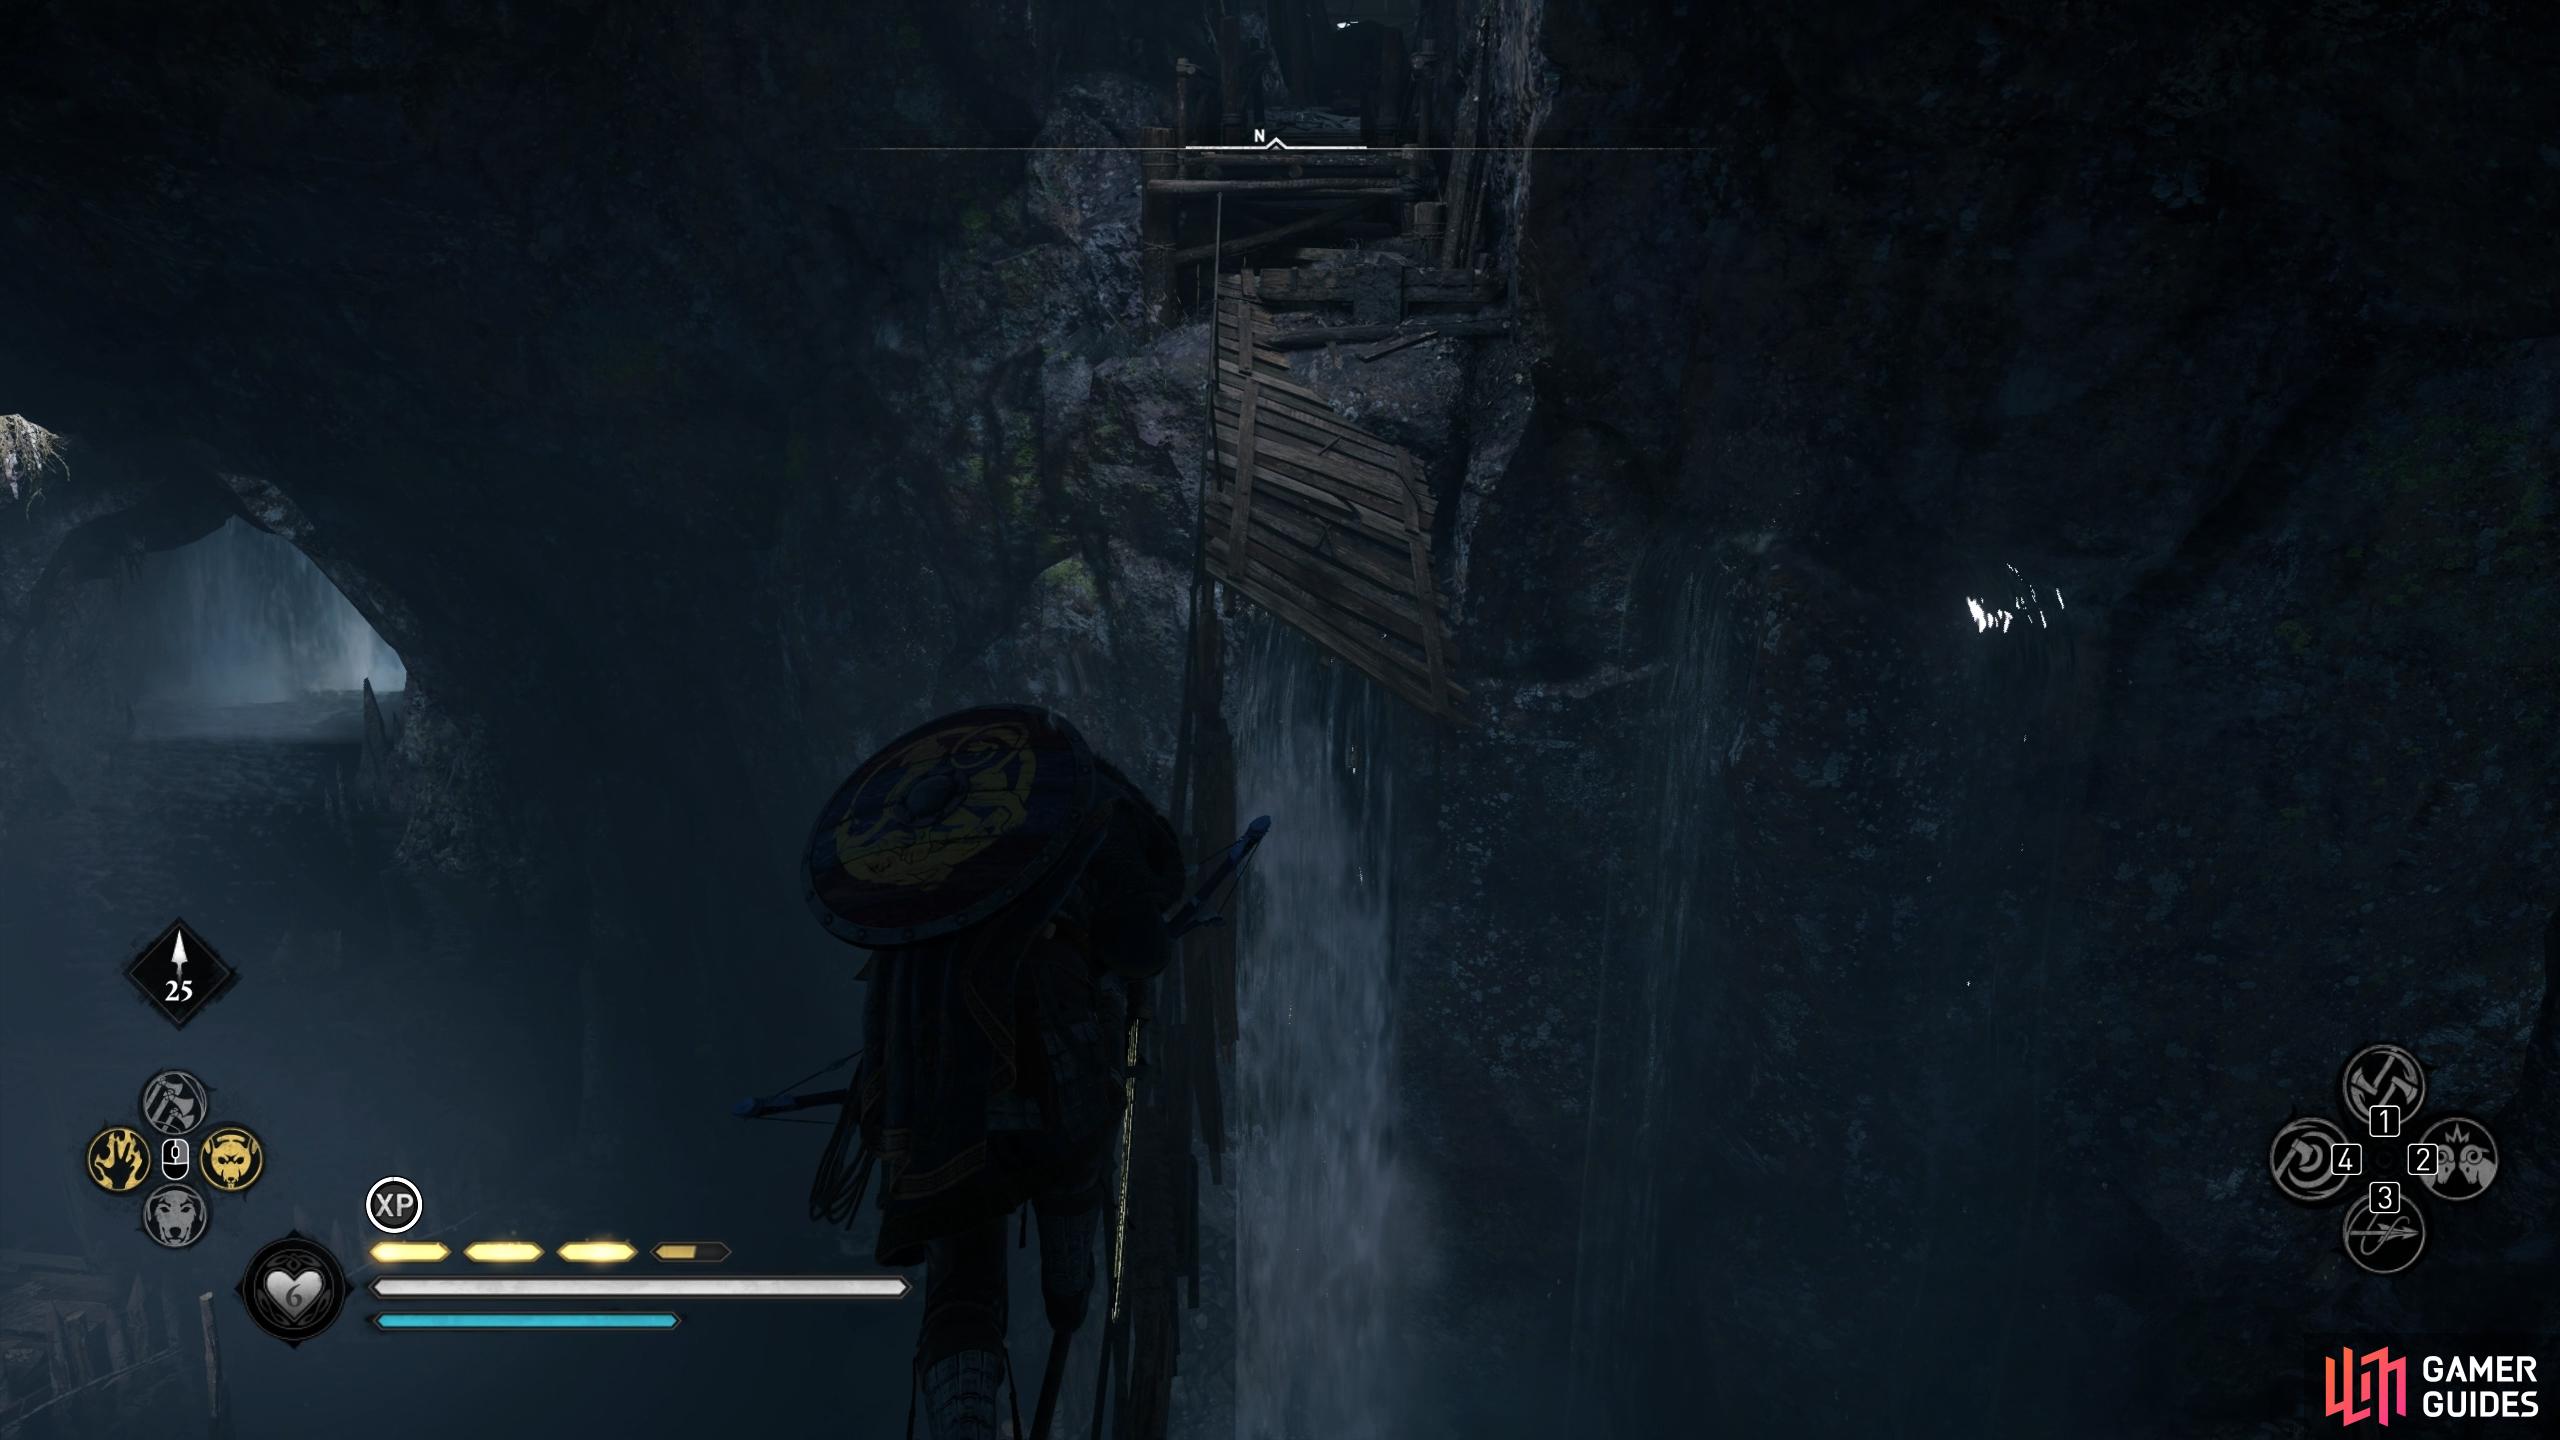 Once you've looted the chest for the breastplate, follow the rope line out of the cave.